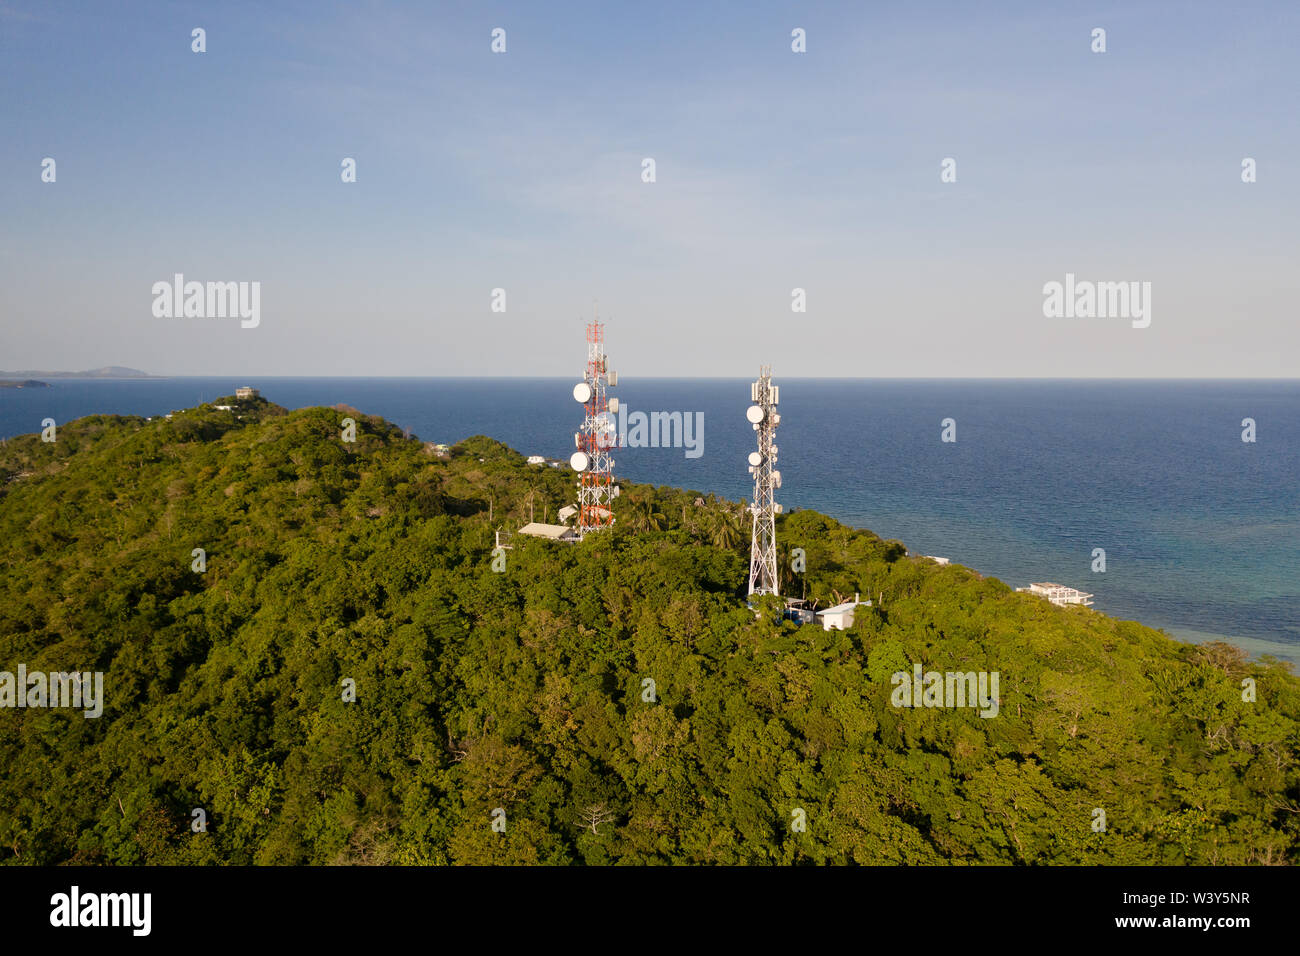 Telecommunication tower, communication antenna. Repeaters on a metal tower. Landscape with hills and rainforest, view from above. Tower with repeaters. Stock Photo